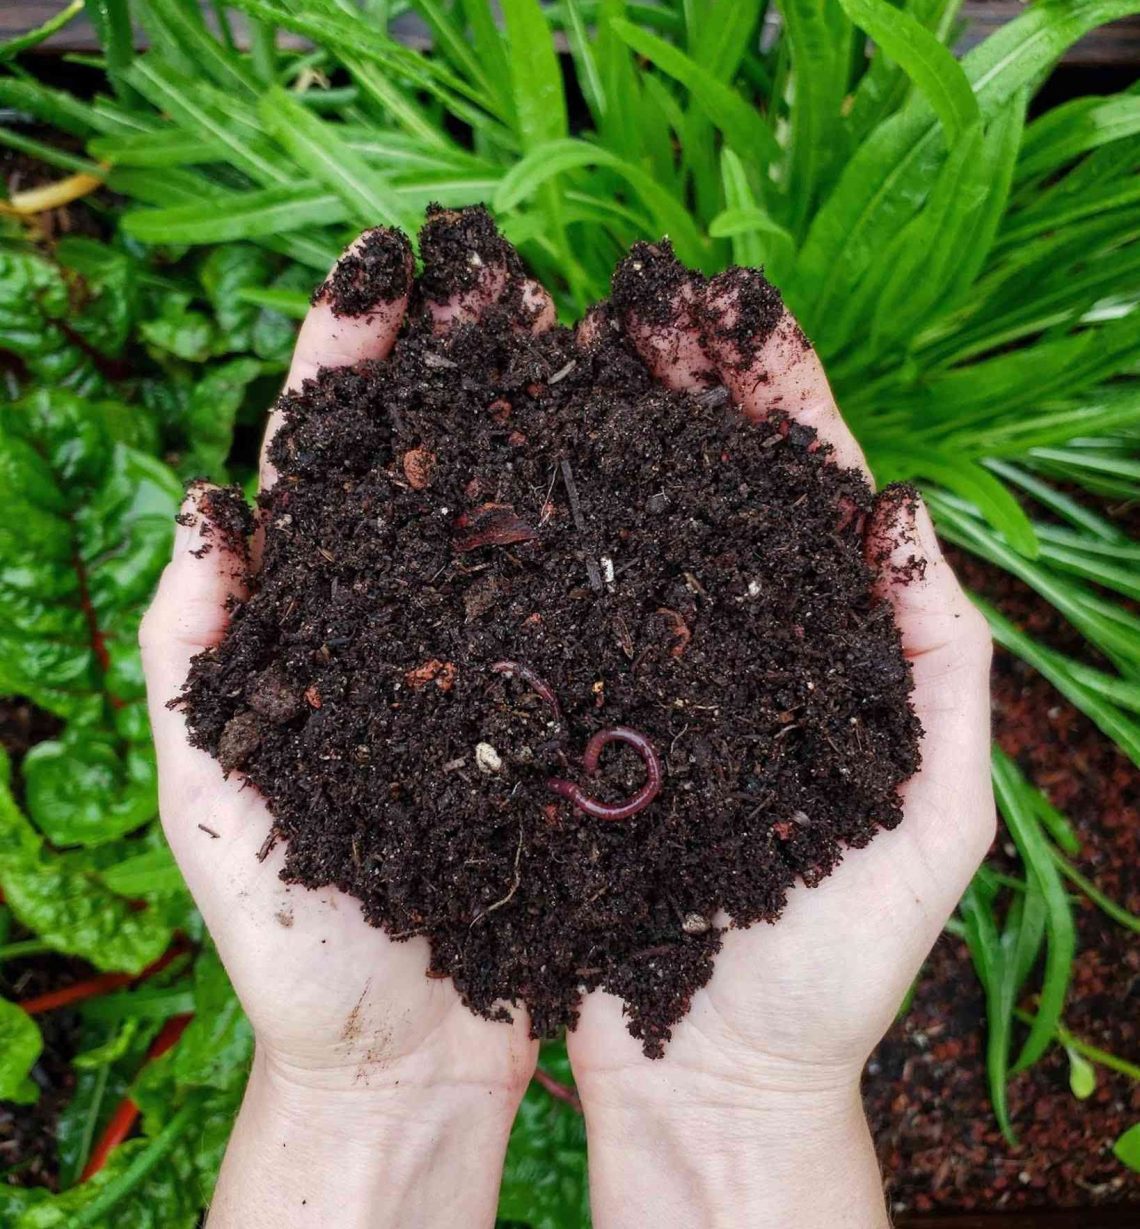 hands holding composted soil with earthworms